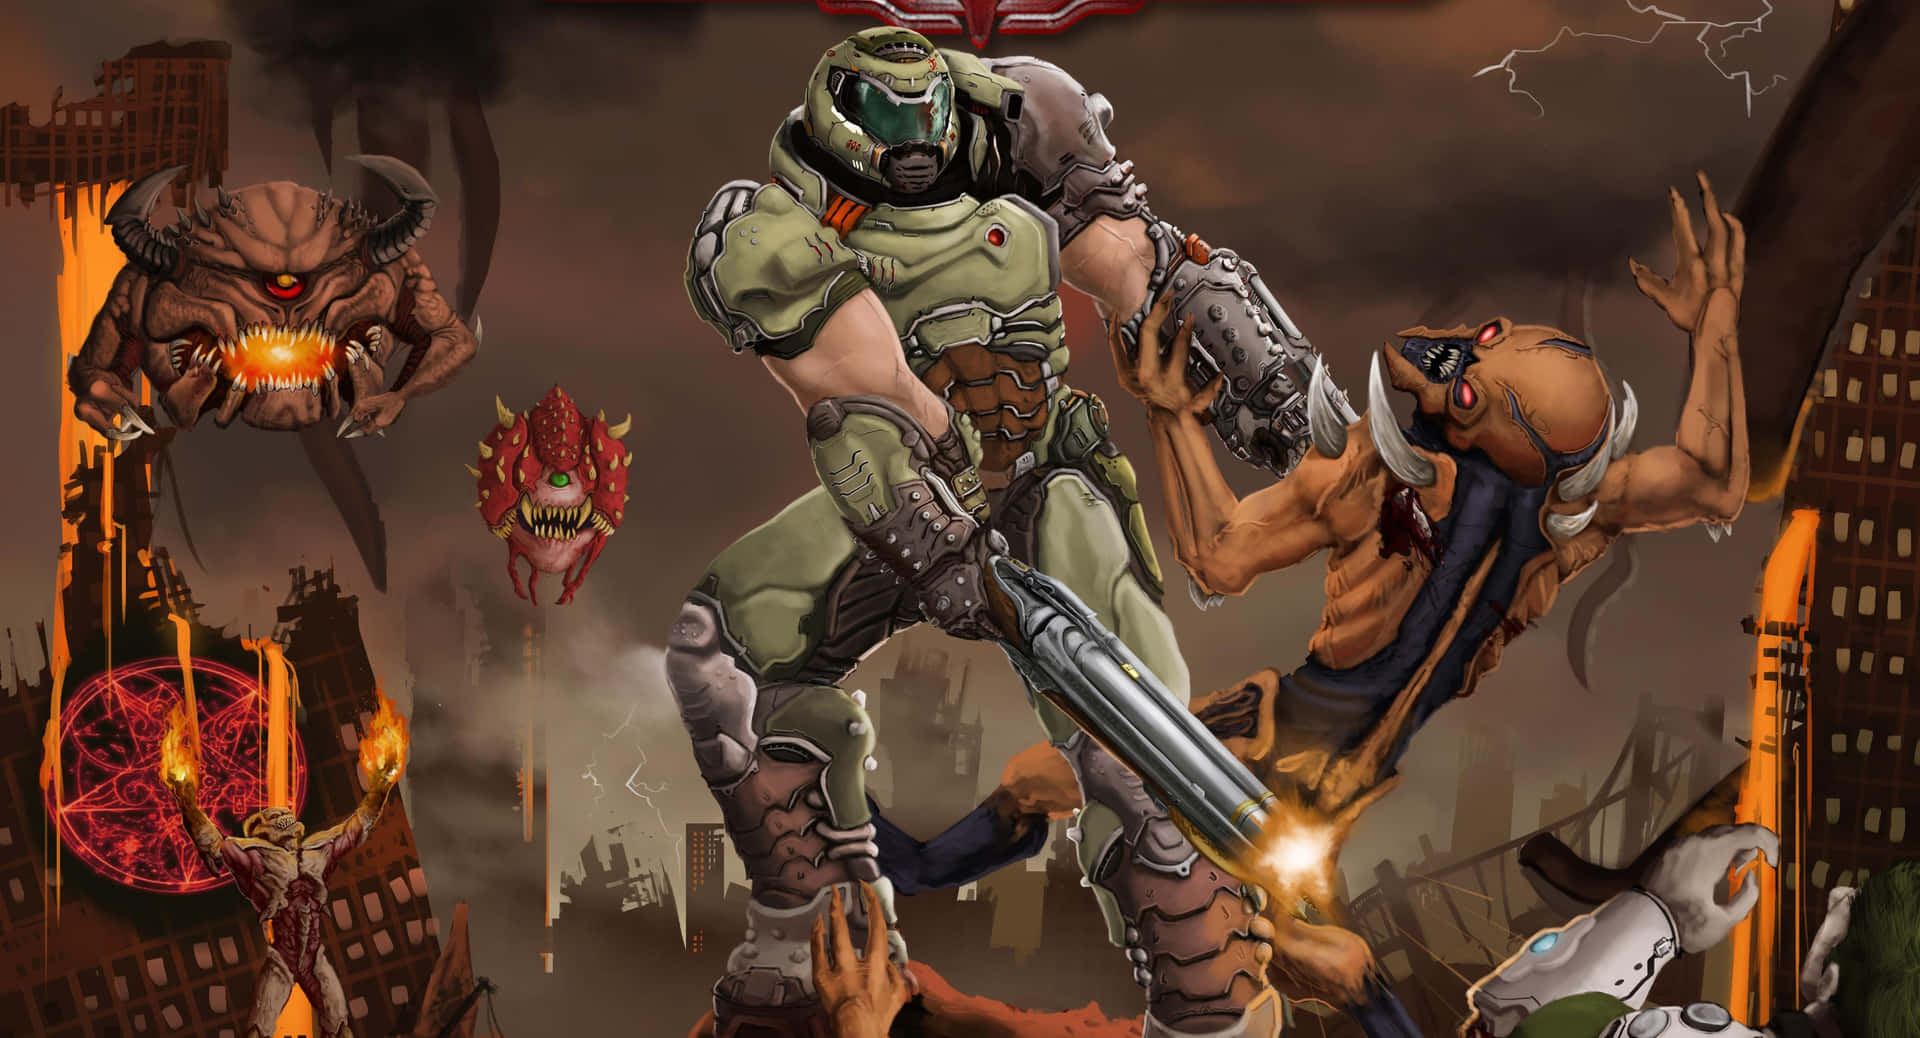 The Iconic Doom Slayer Ready For Action. Background